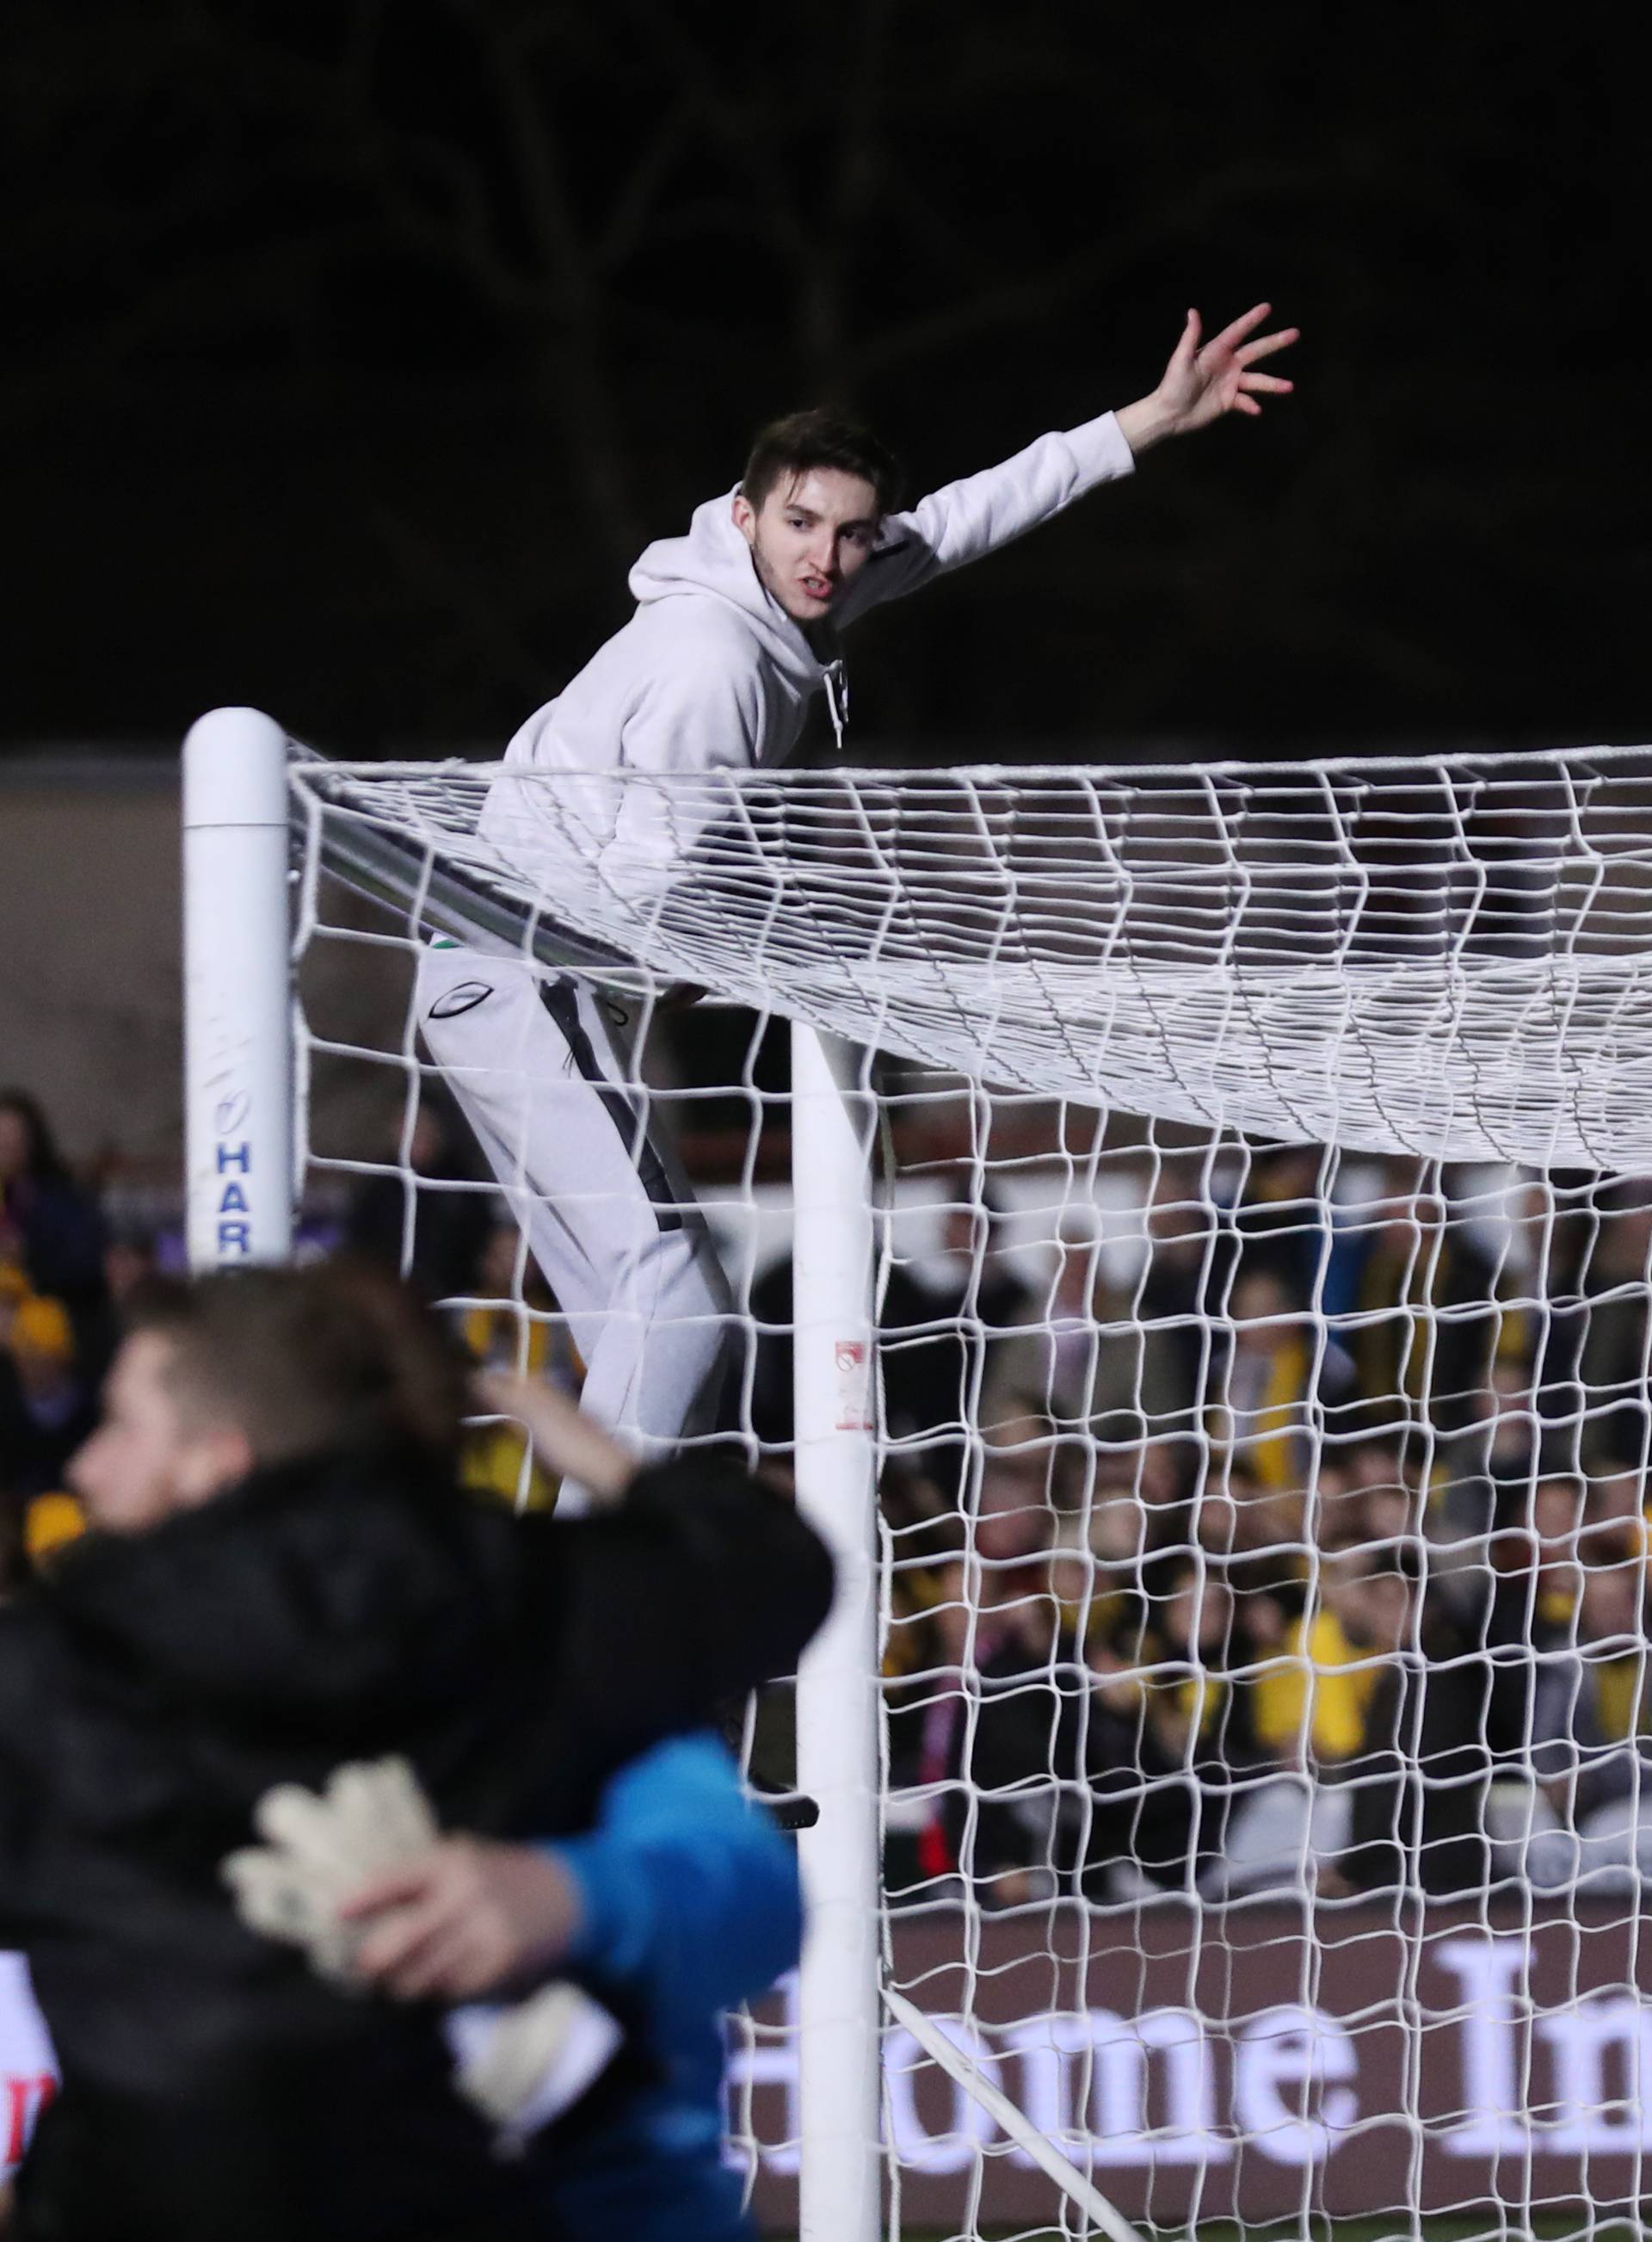 Sutton fans on the pitch and on the crossbar of a goal after the match